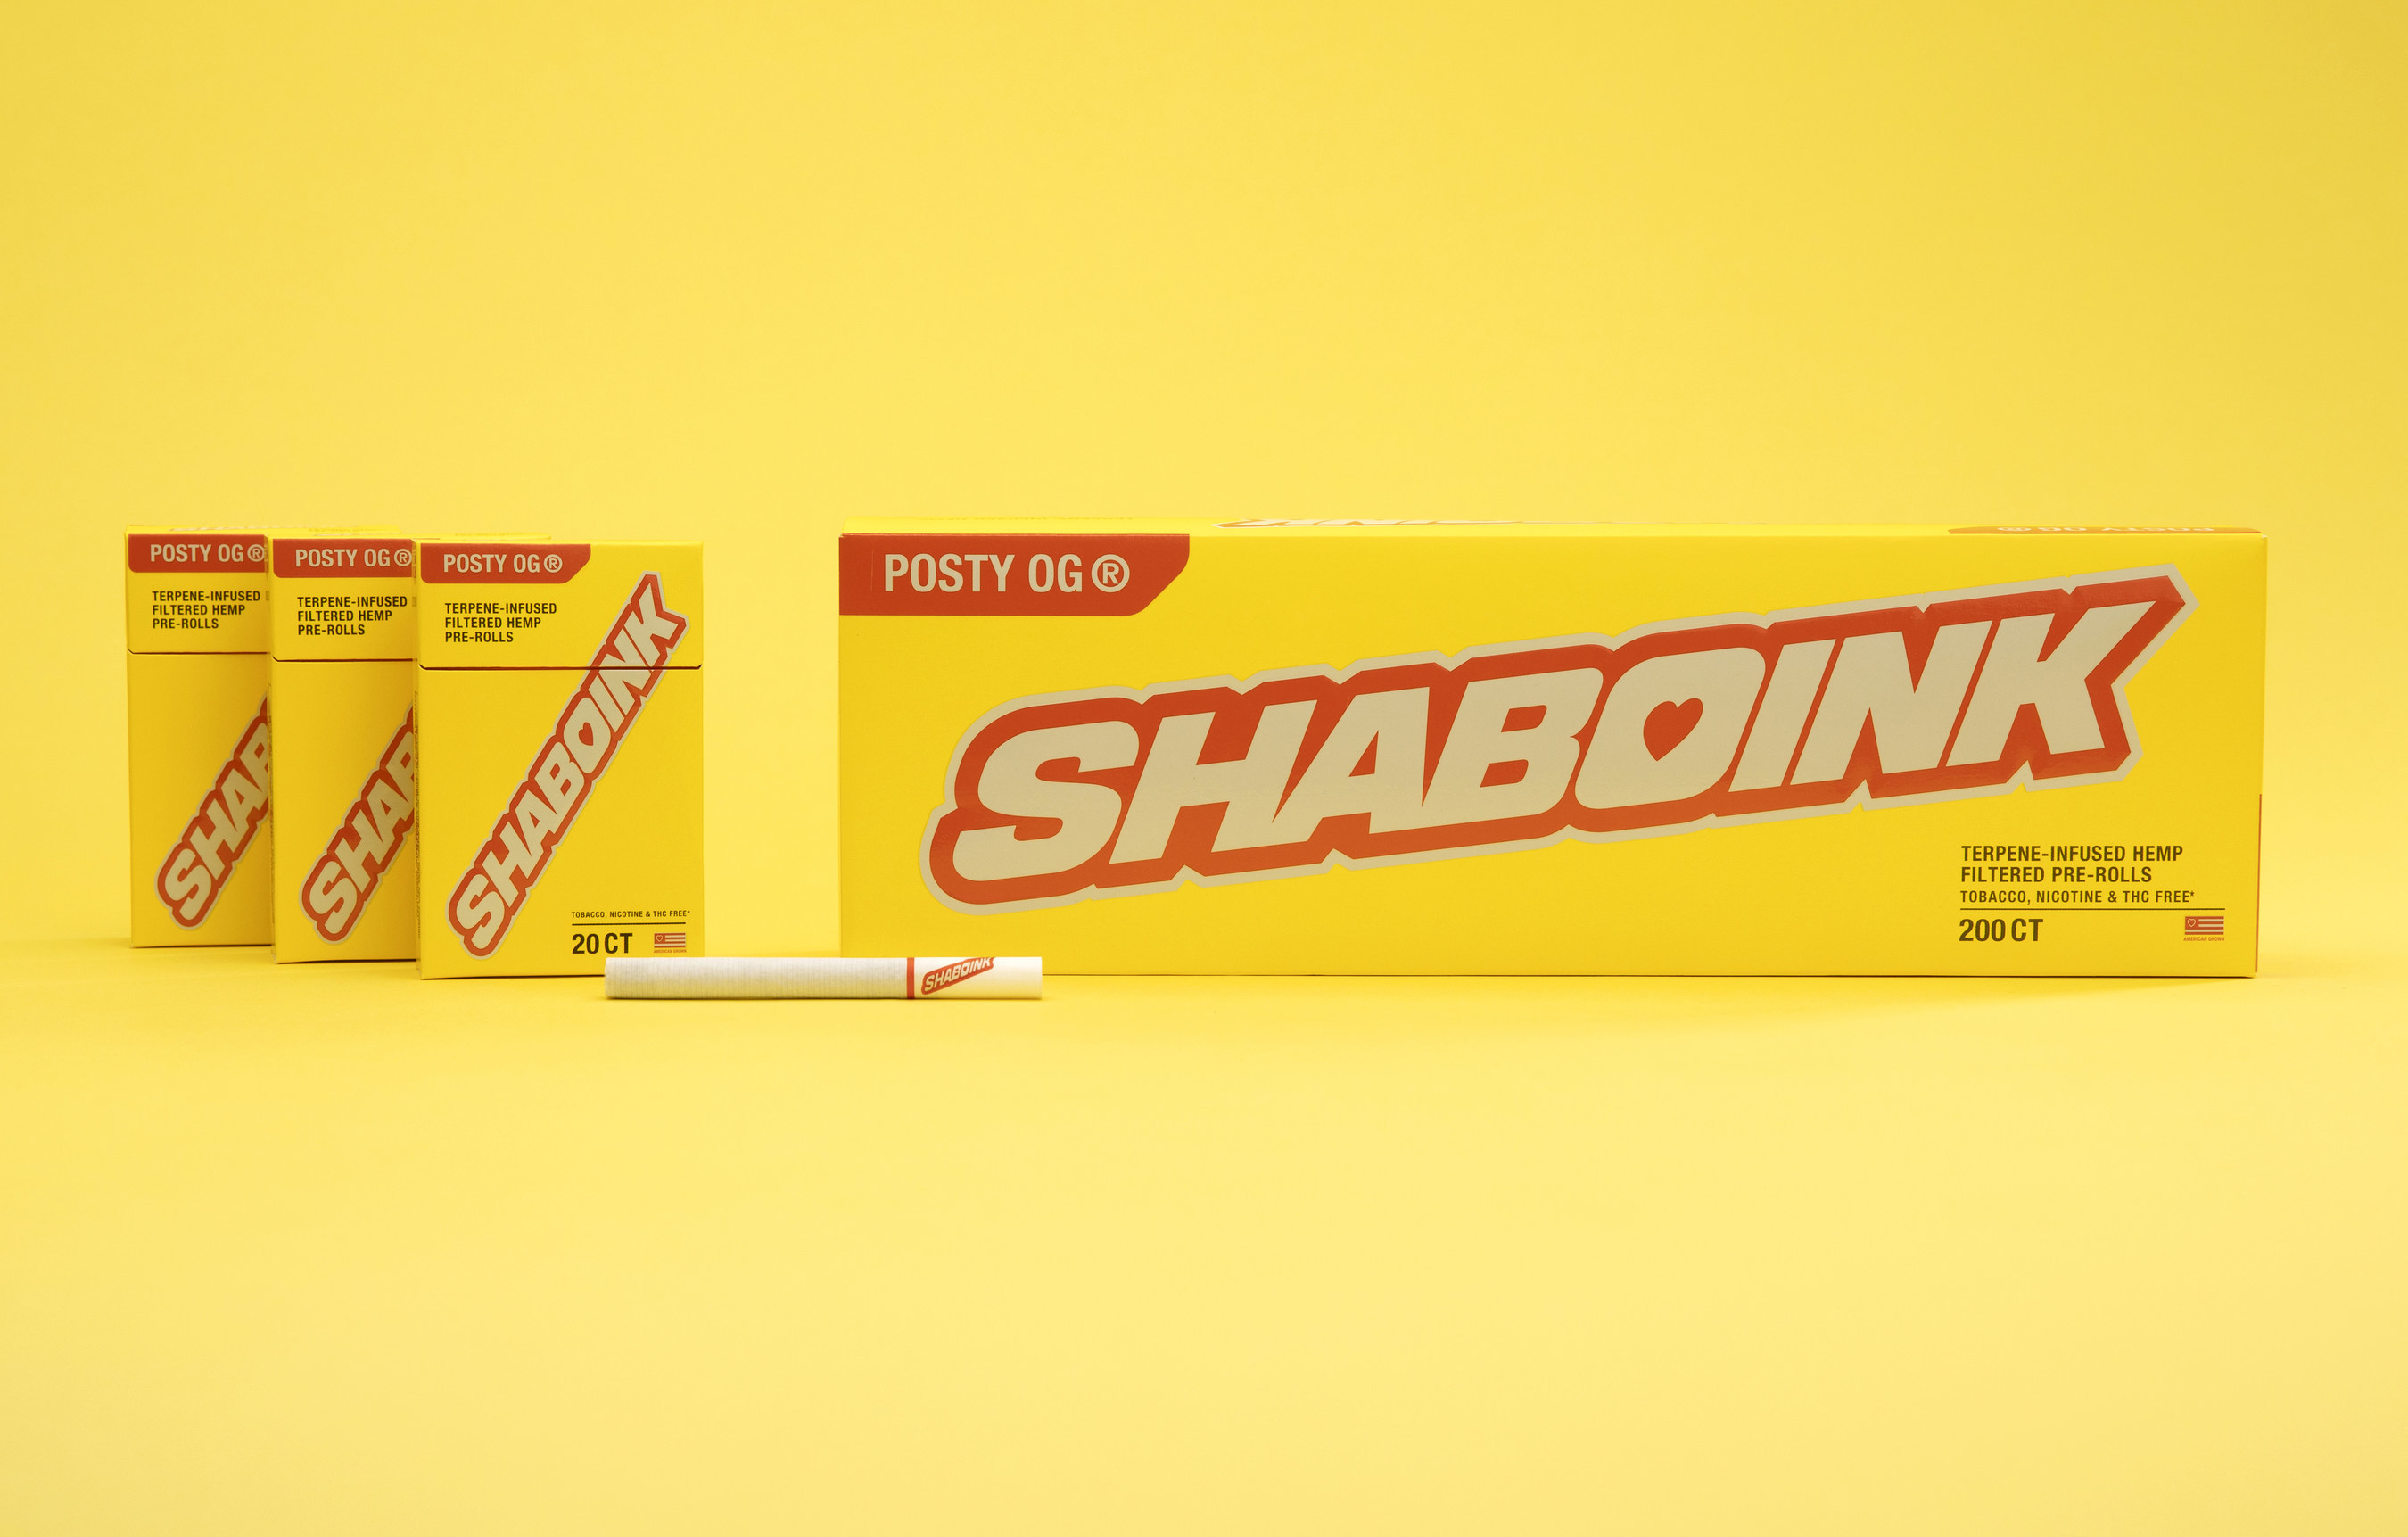 Post Malone Launches Shaboink Hemp Pre Rolls Announces Partnership With Icon Farms And Sherbinskis